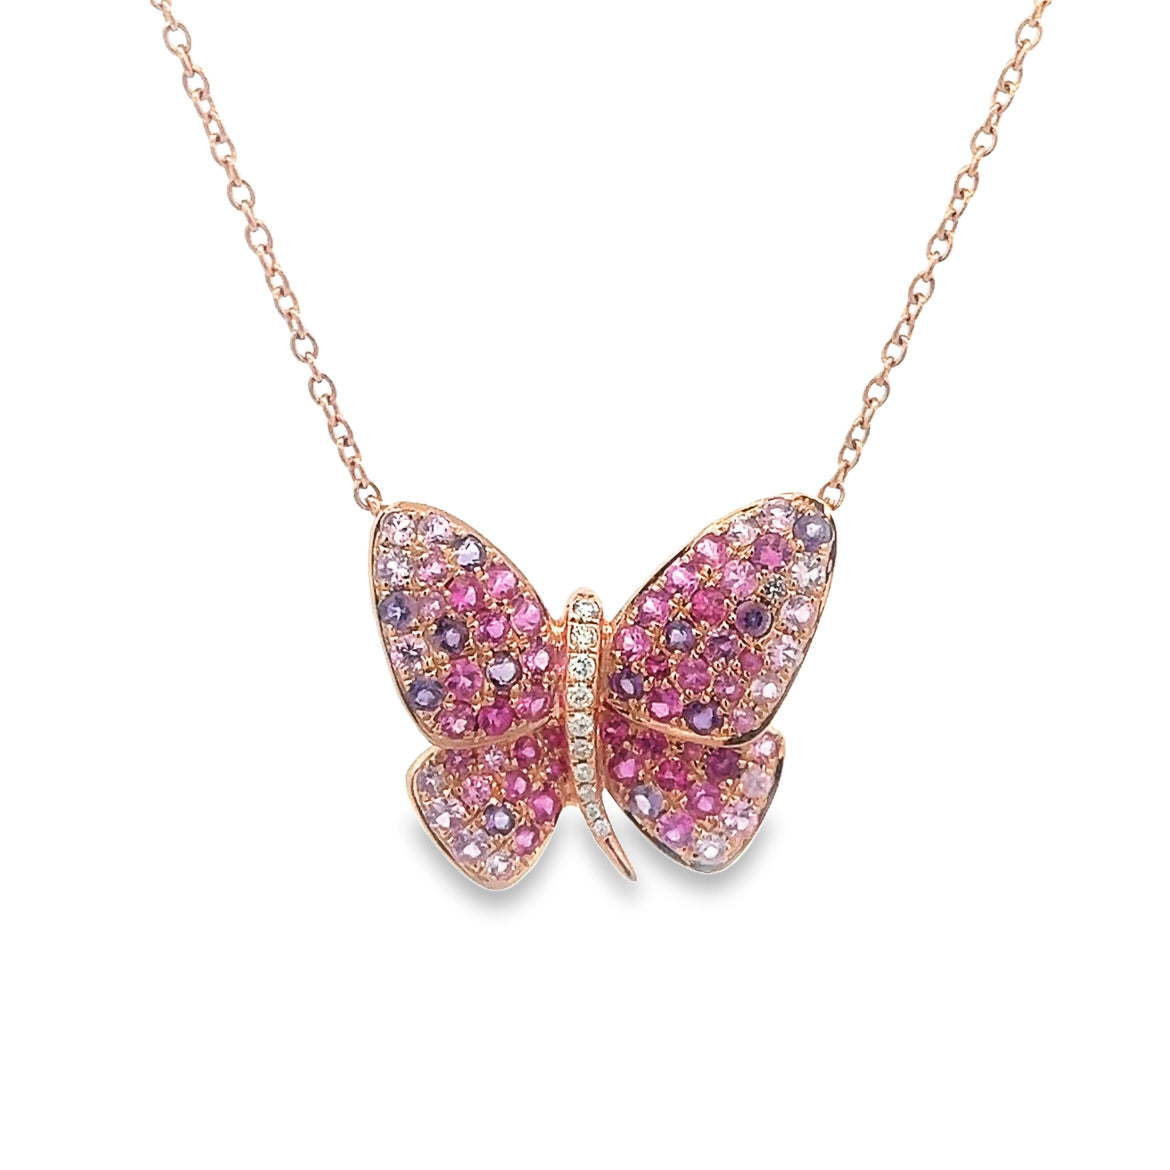 18K ROSE GOLD BUTTERFLY NECKLACE WITH PINK SAPPHIRE